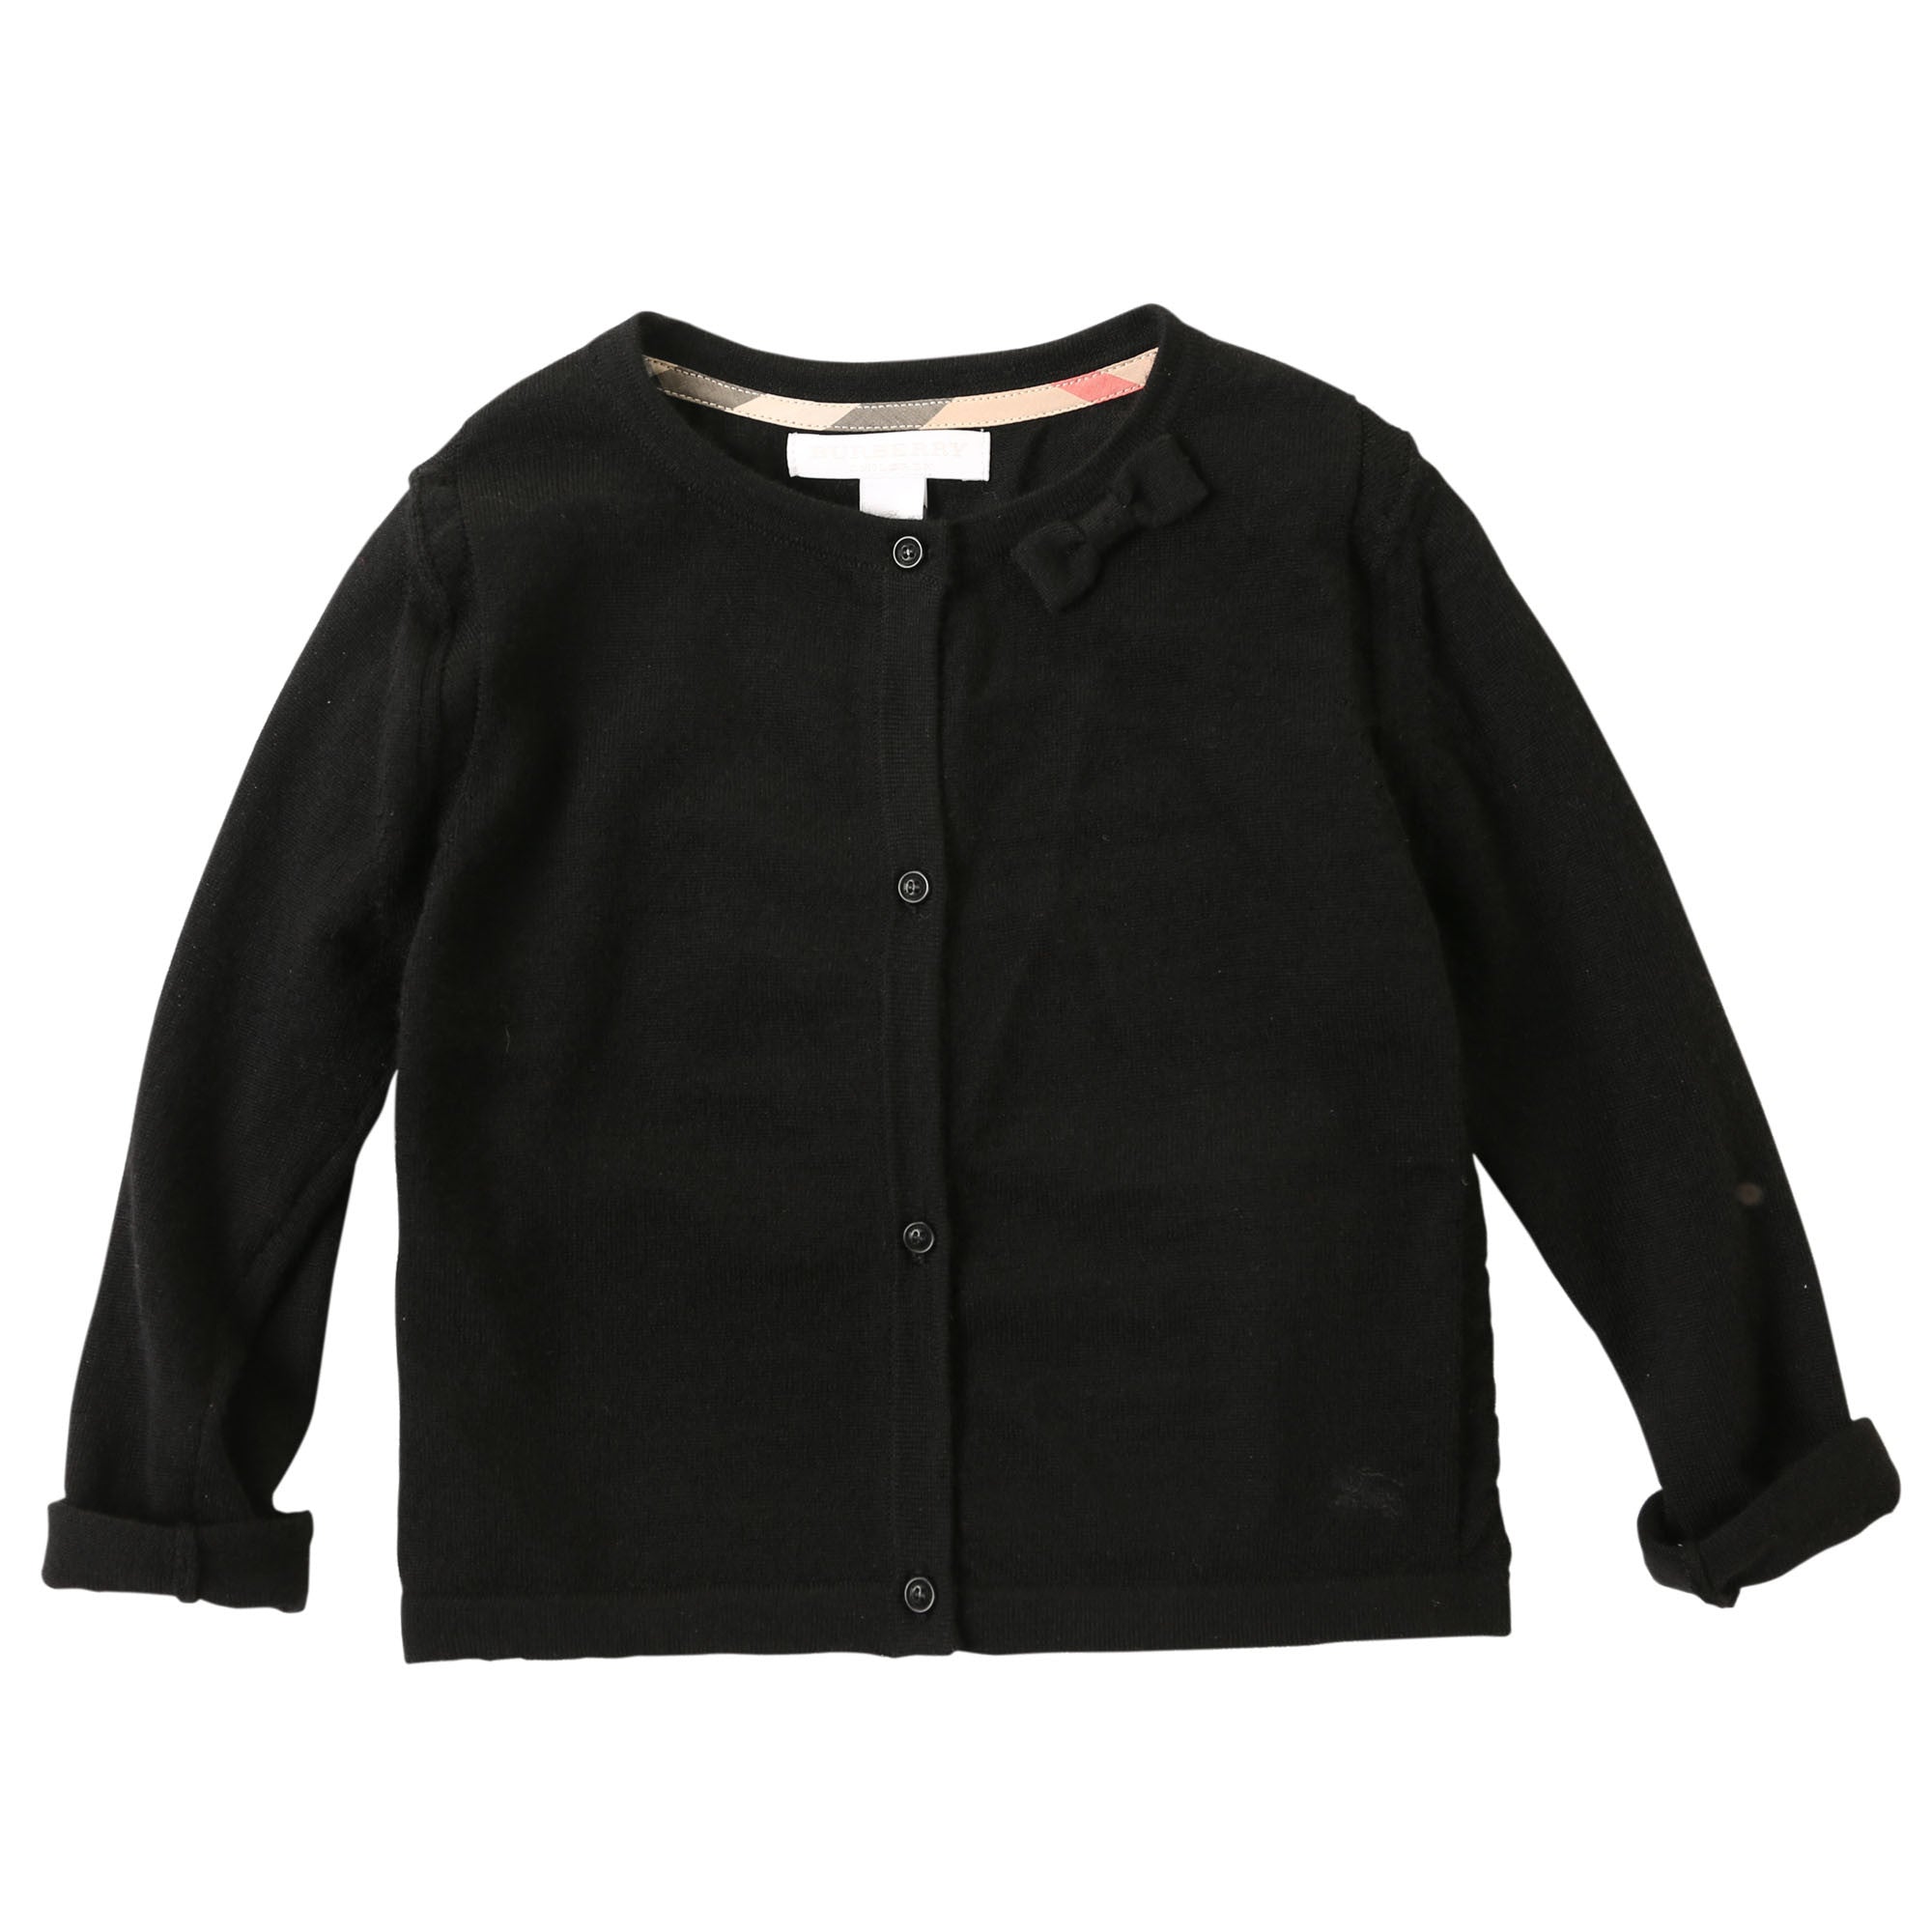 Baby Girls Black Bow Trims Knitted Cardigan - CÉMAROSE | Children's Fashion Store - 1